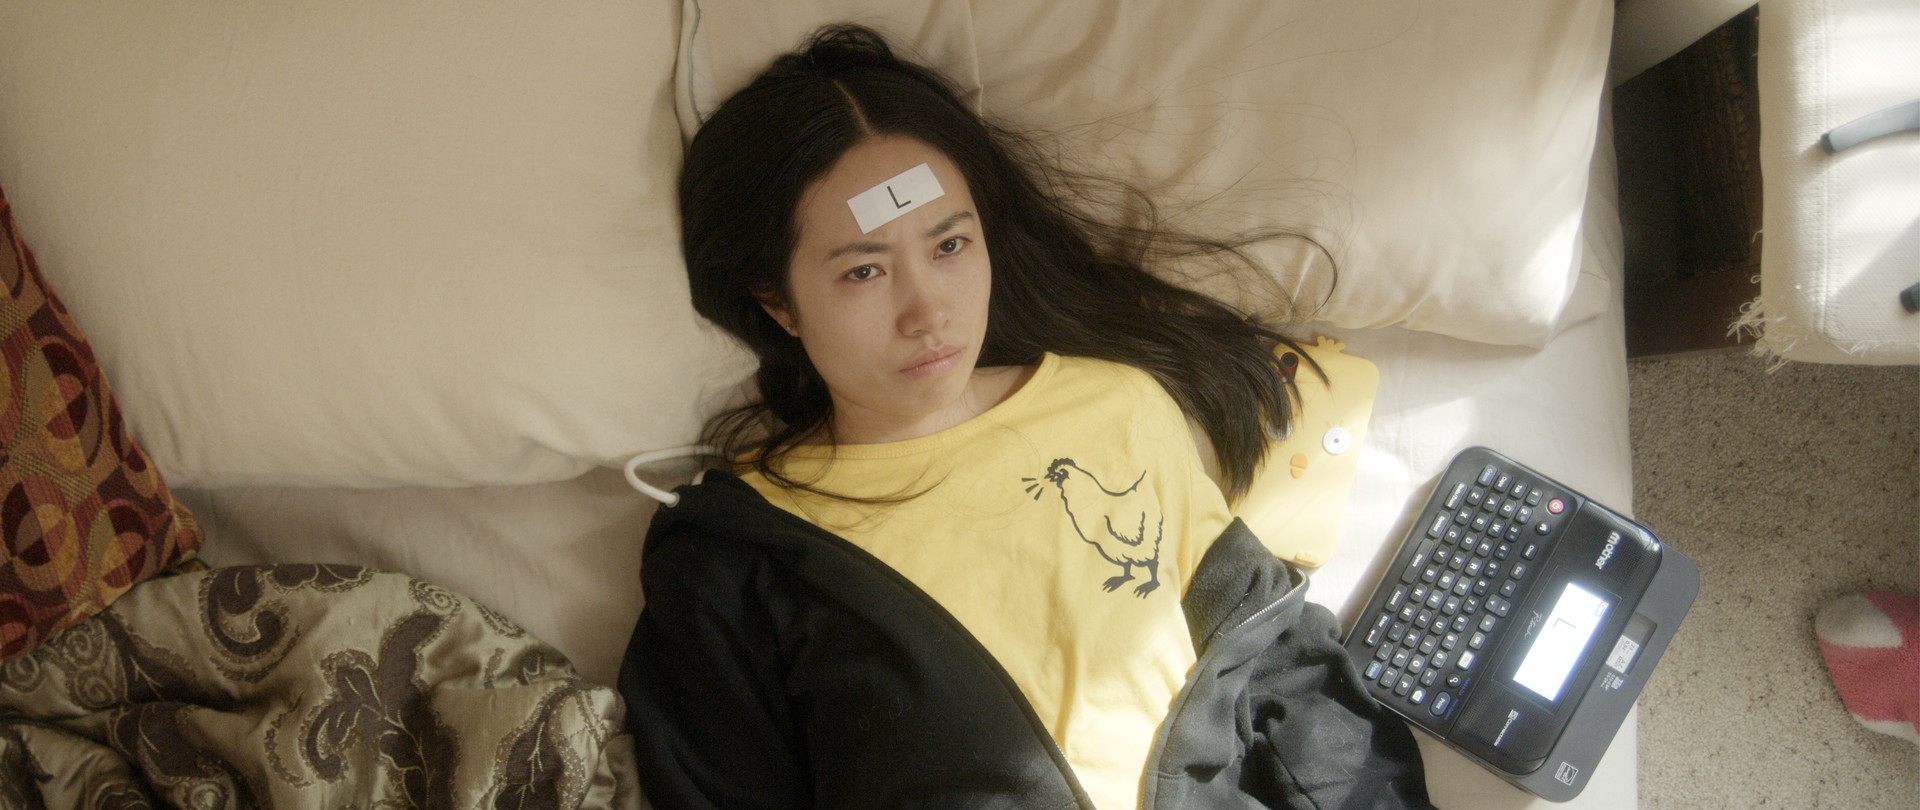 Person with "L" label on forehead lays on bed, label maker at side